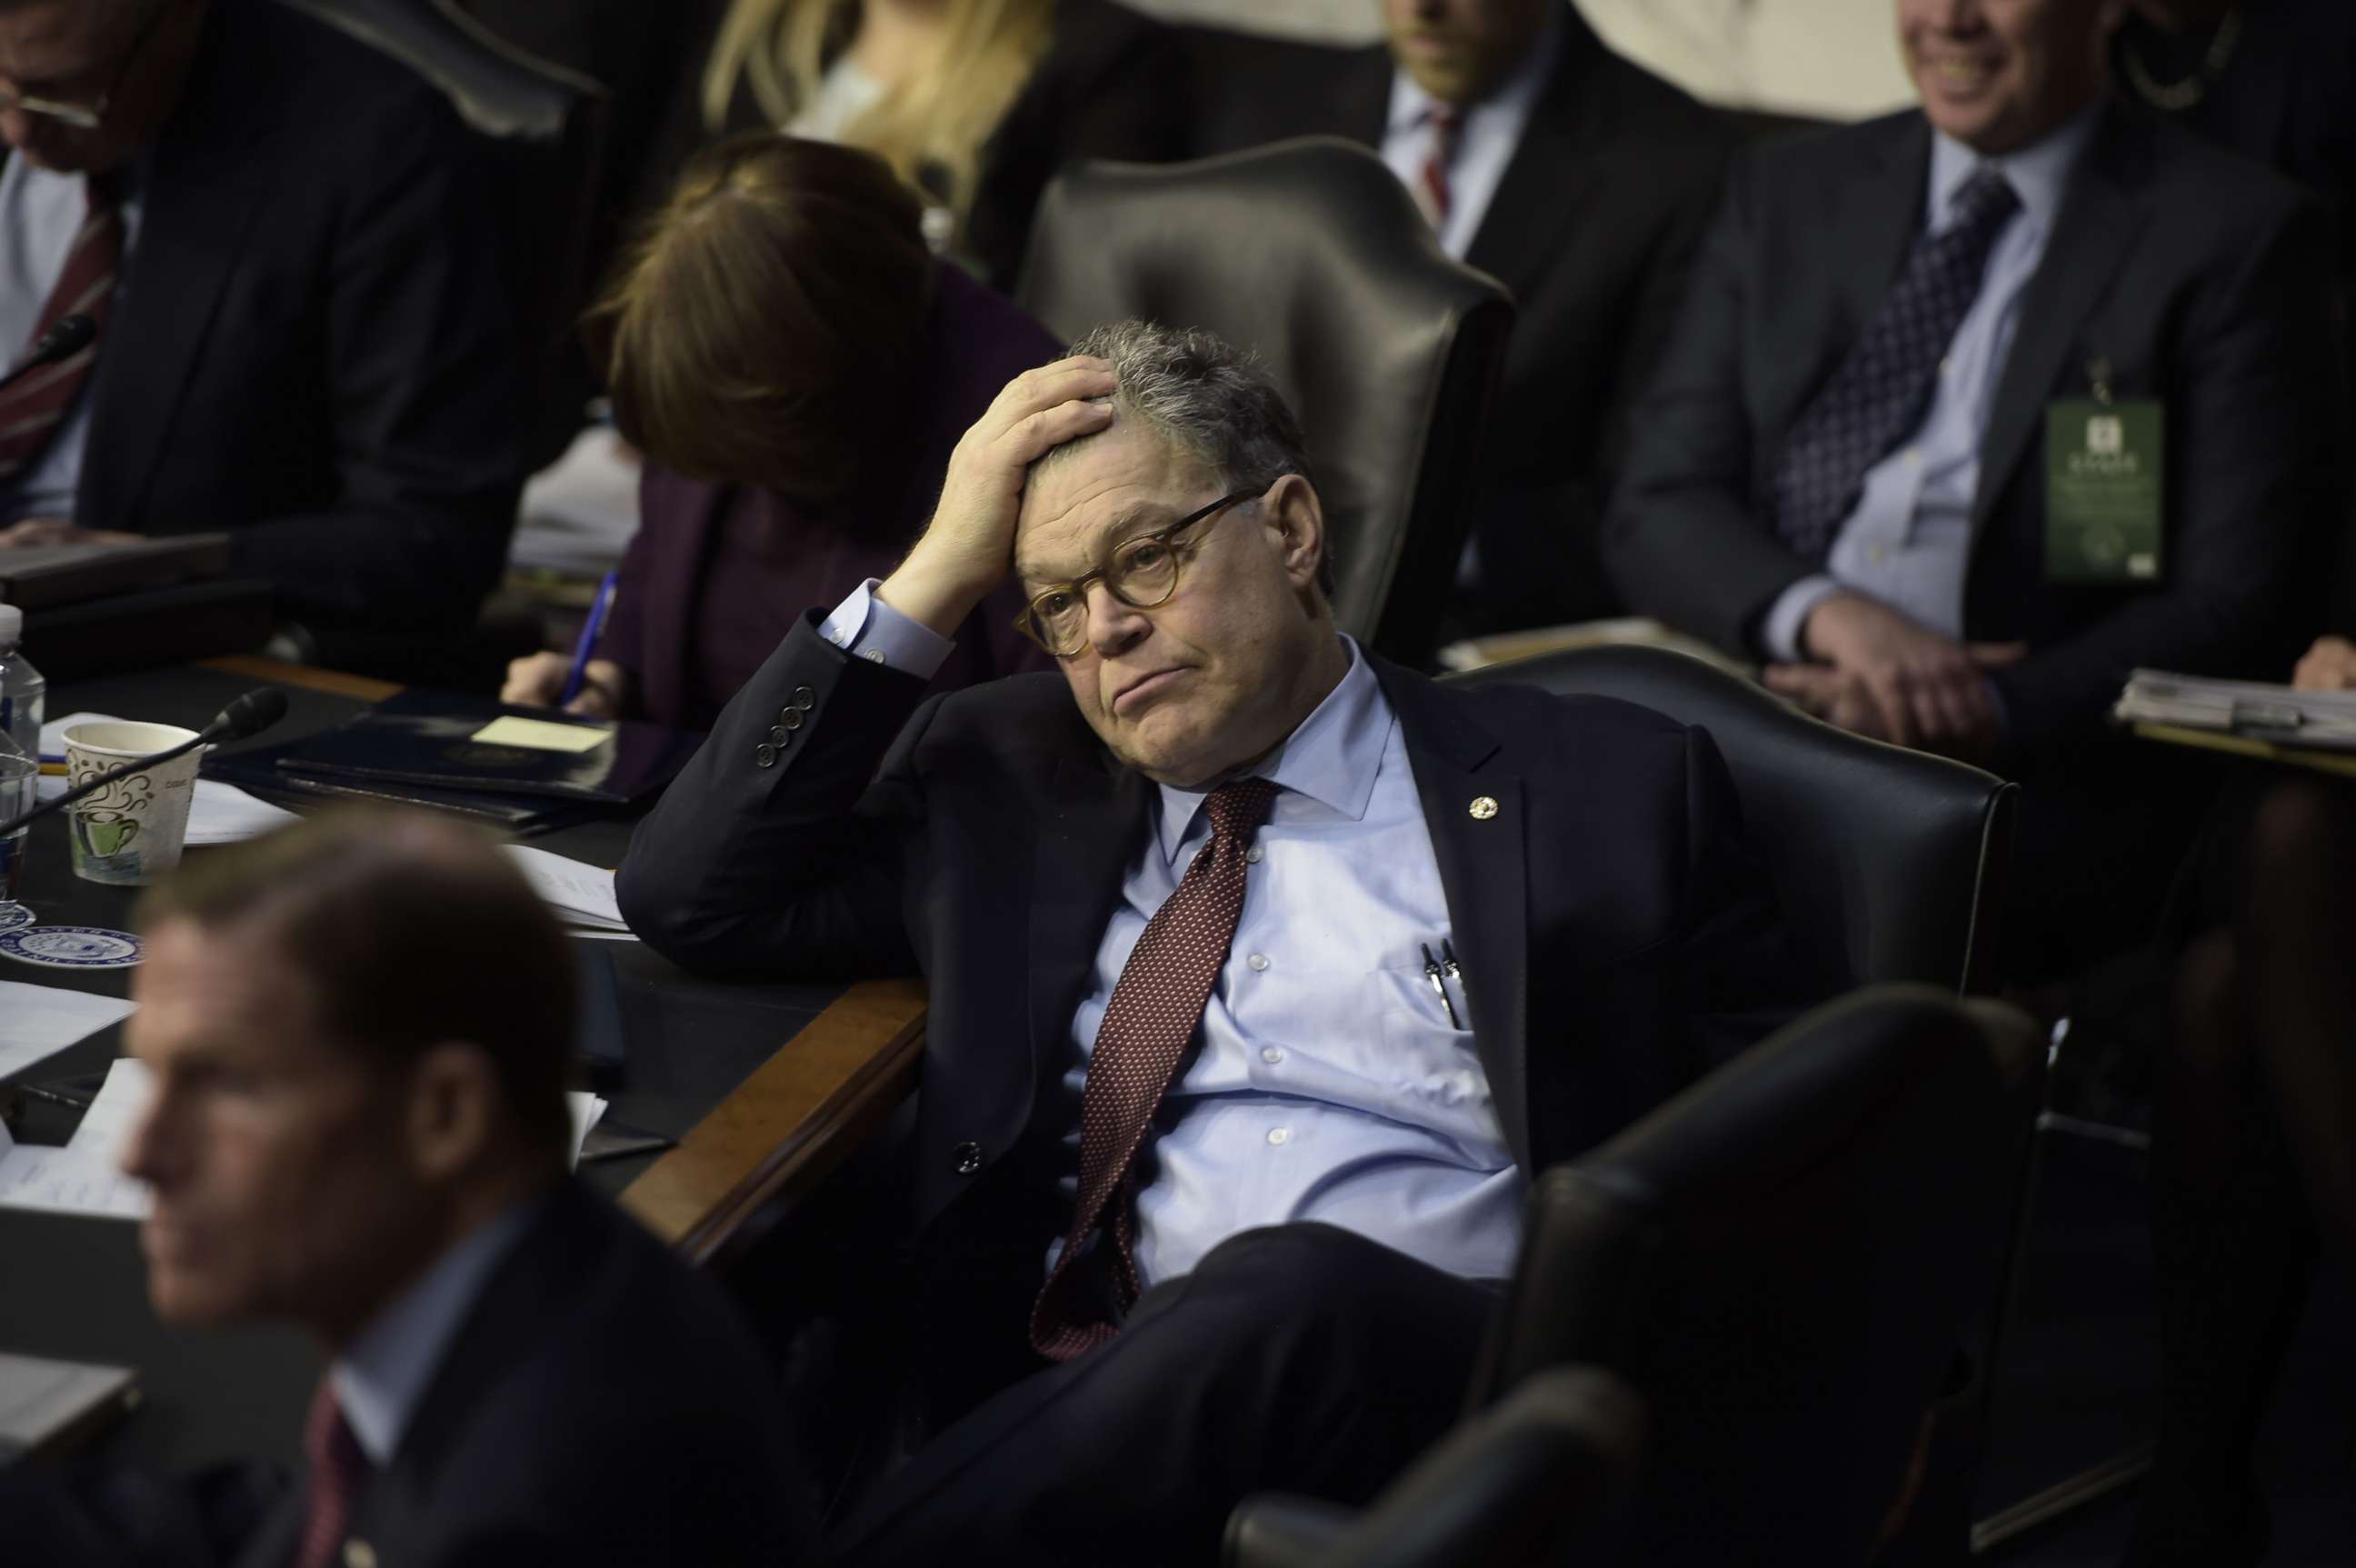 PHOTO: Sen. Al Franken takes a break during the Neil Gorsuch Senate Judiciary Committee confirmation hearing as President Donald Trump's nominee for the Supreme Court on Capitol Hill in Washington, D.C., March 20, 2017.
